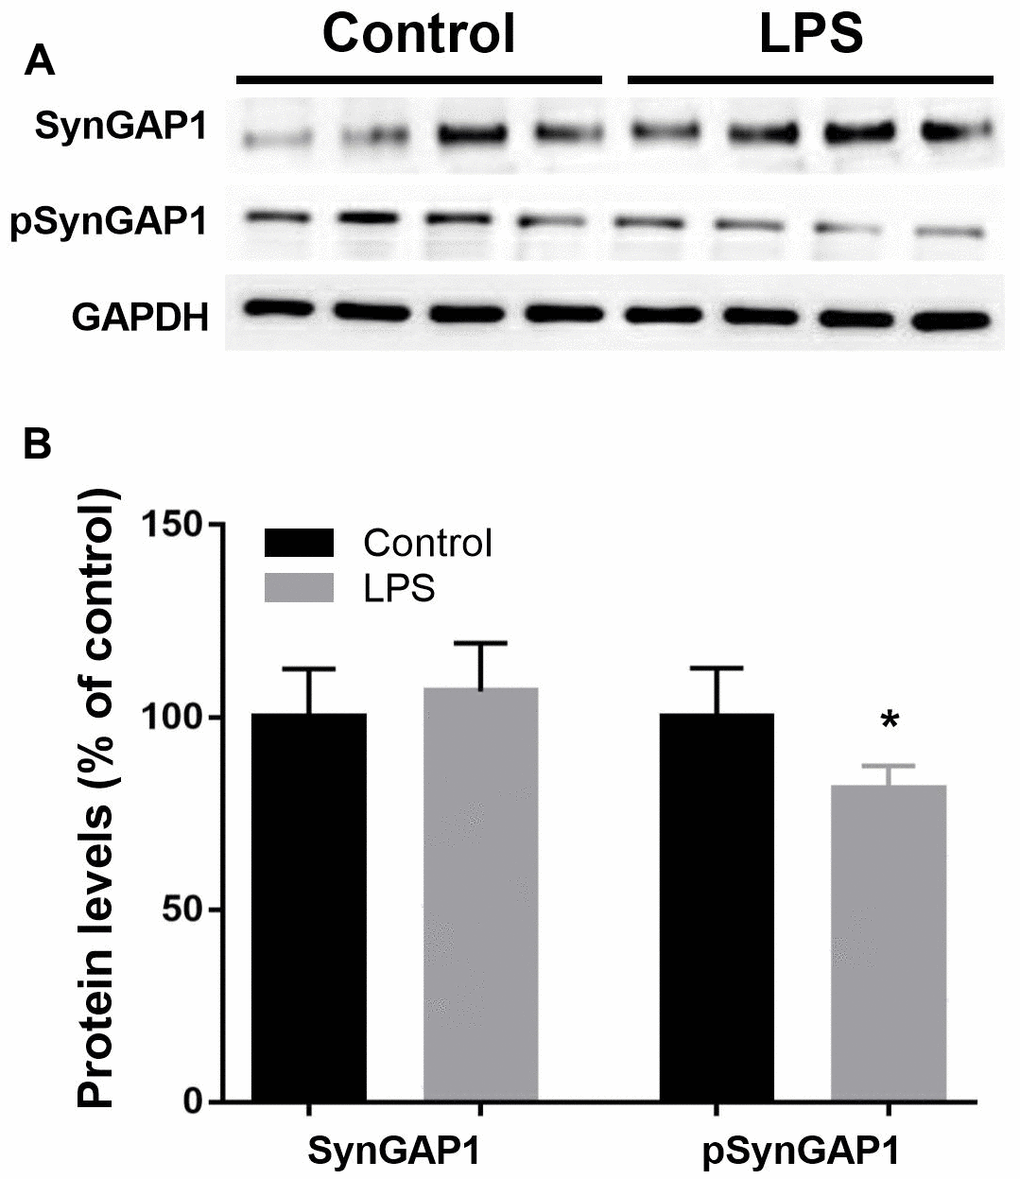 Validation of Syngap1 and pSyngap1 in hippocampus by western blotting analysis. (A) Representative Western blots bands of Syngap1 and pSyngap1 in the hippocampus; (B) Quantitative analysis of Syngap1 and pSyngap1 levels between groups. Data are presented as the mean ± SEM, n = 4, *P 